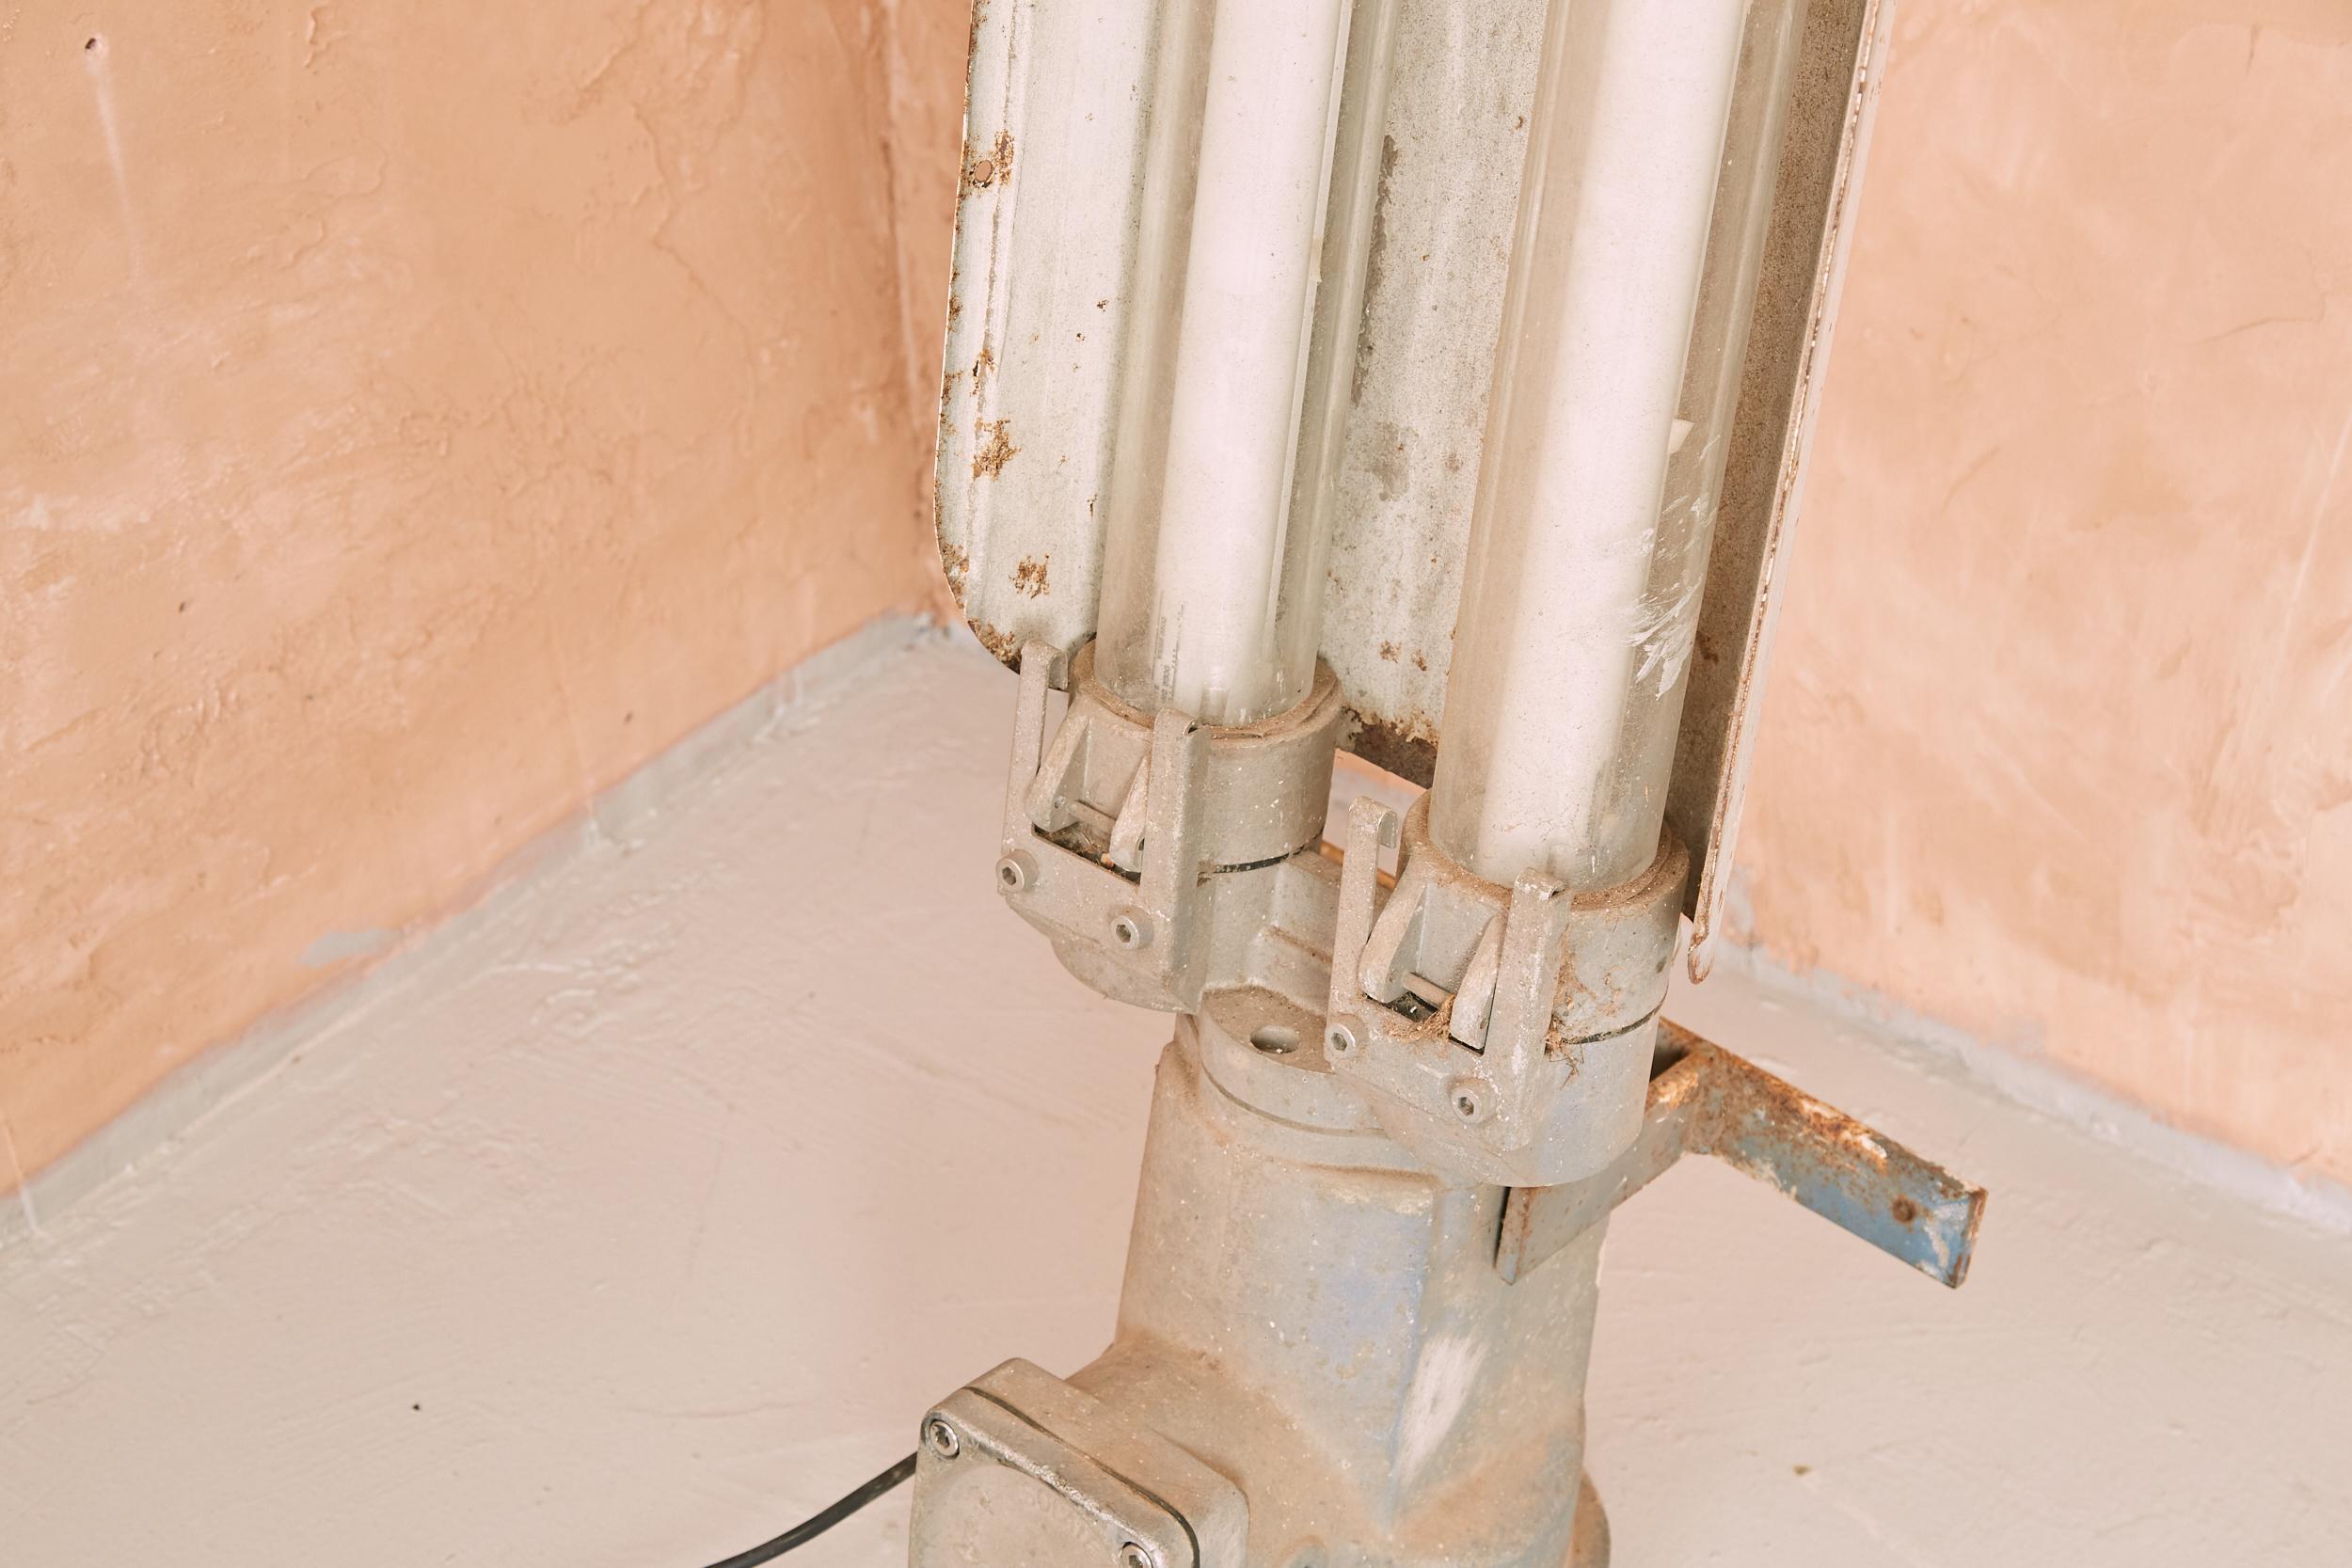 A Thorn FLP explosion proof lamp with shade built in.
Works exceptionally well as a floor standing lamp but can also be hung as originally intended.
In full working order with original patina still in tact. 
A very heavy industrial item with a